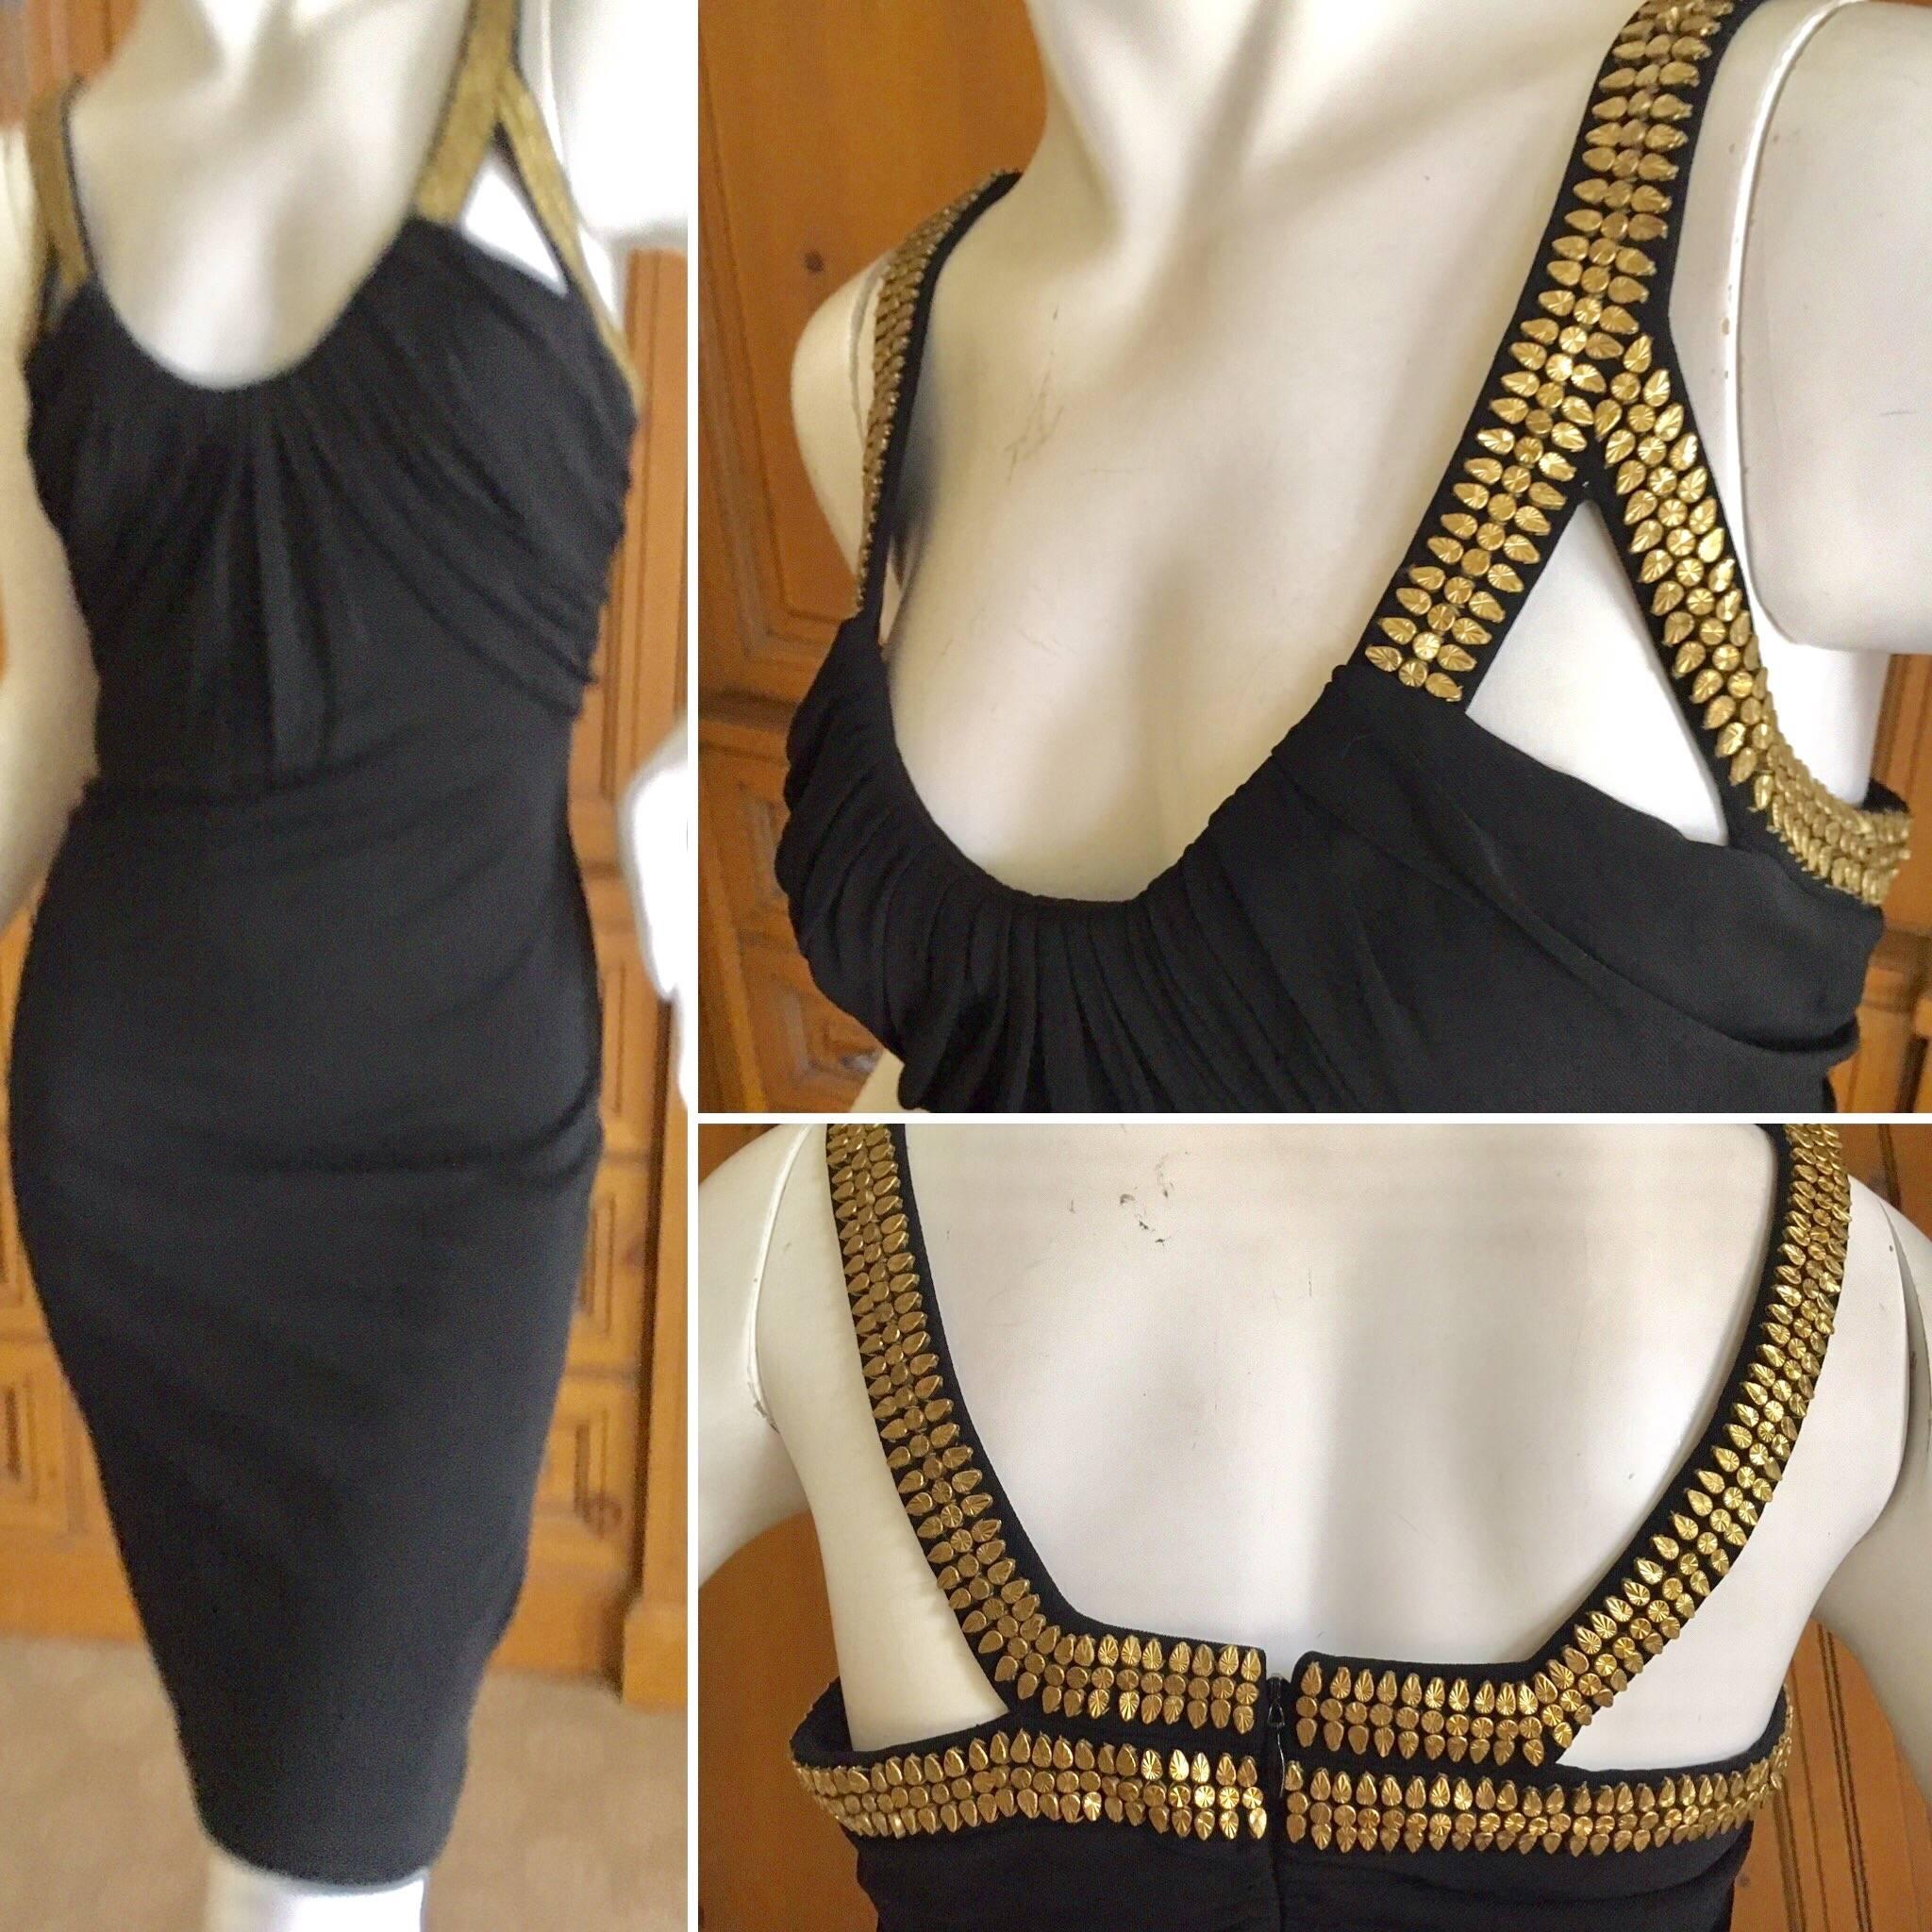 Versace Vintage LBD with Gold Studded Accents.
So pretty.
Size 40
 Bust 38" 
Waist 30" 
Hips 40" 
Length 42"
 Excellent condition